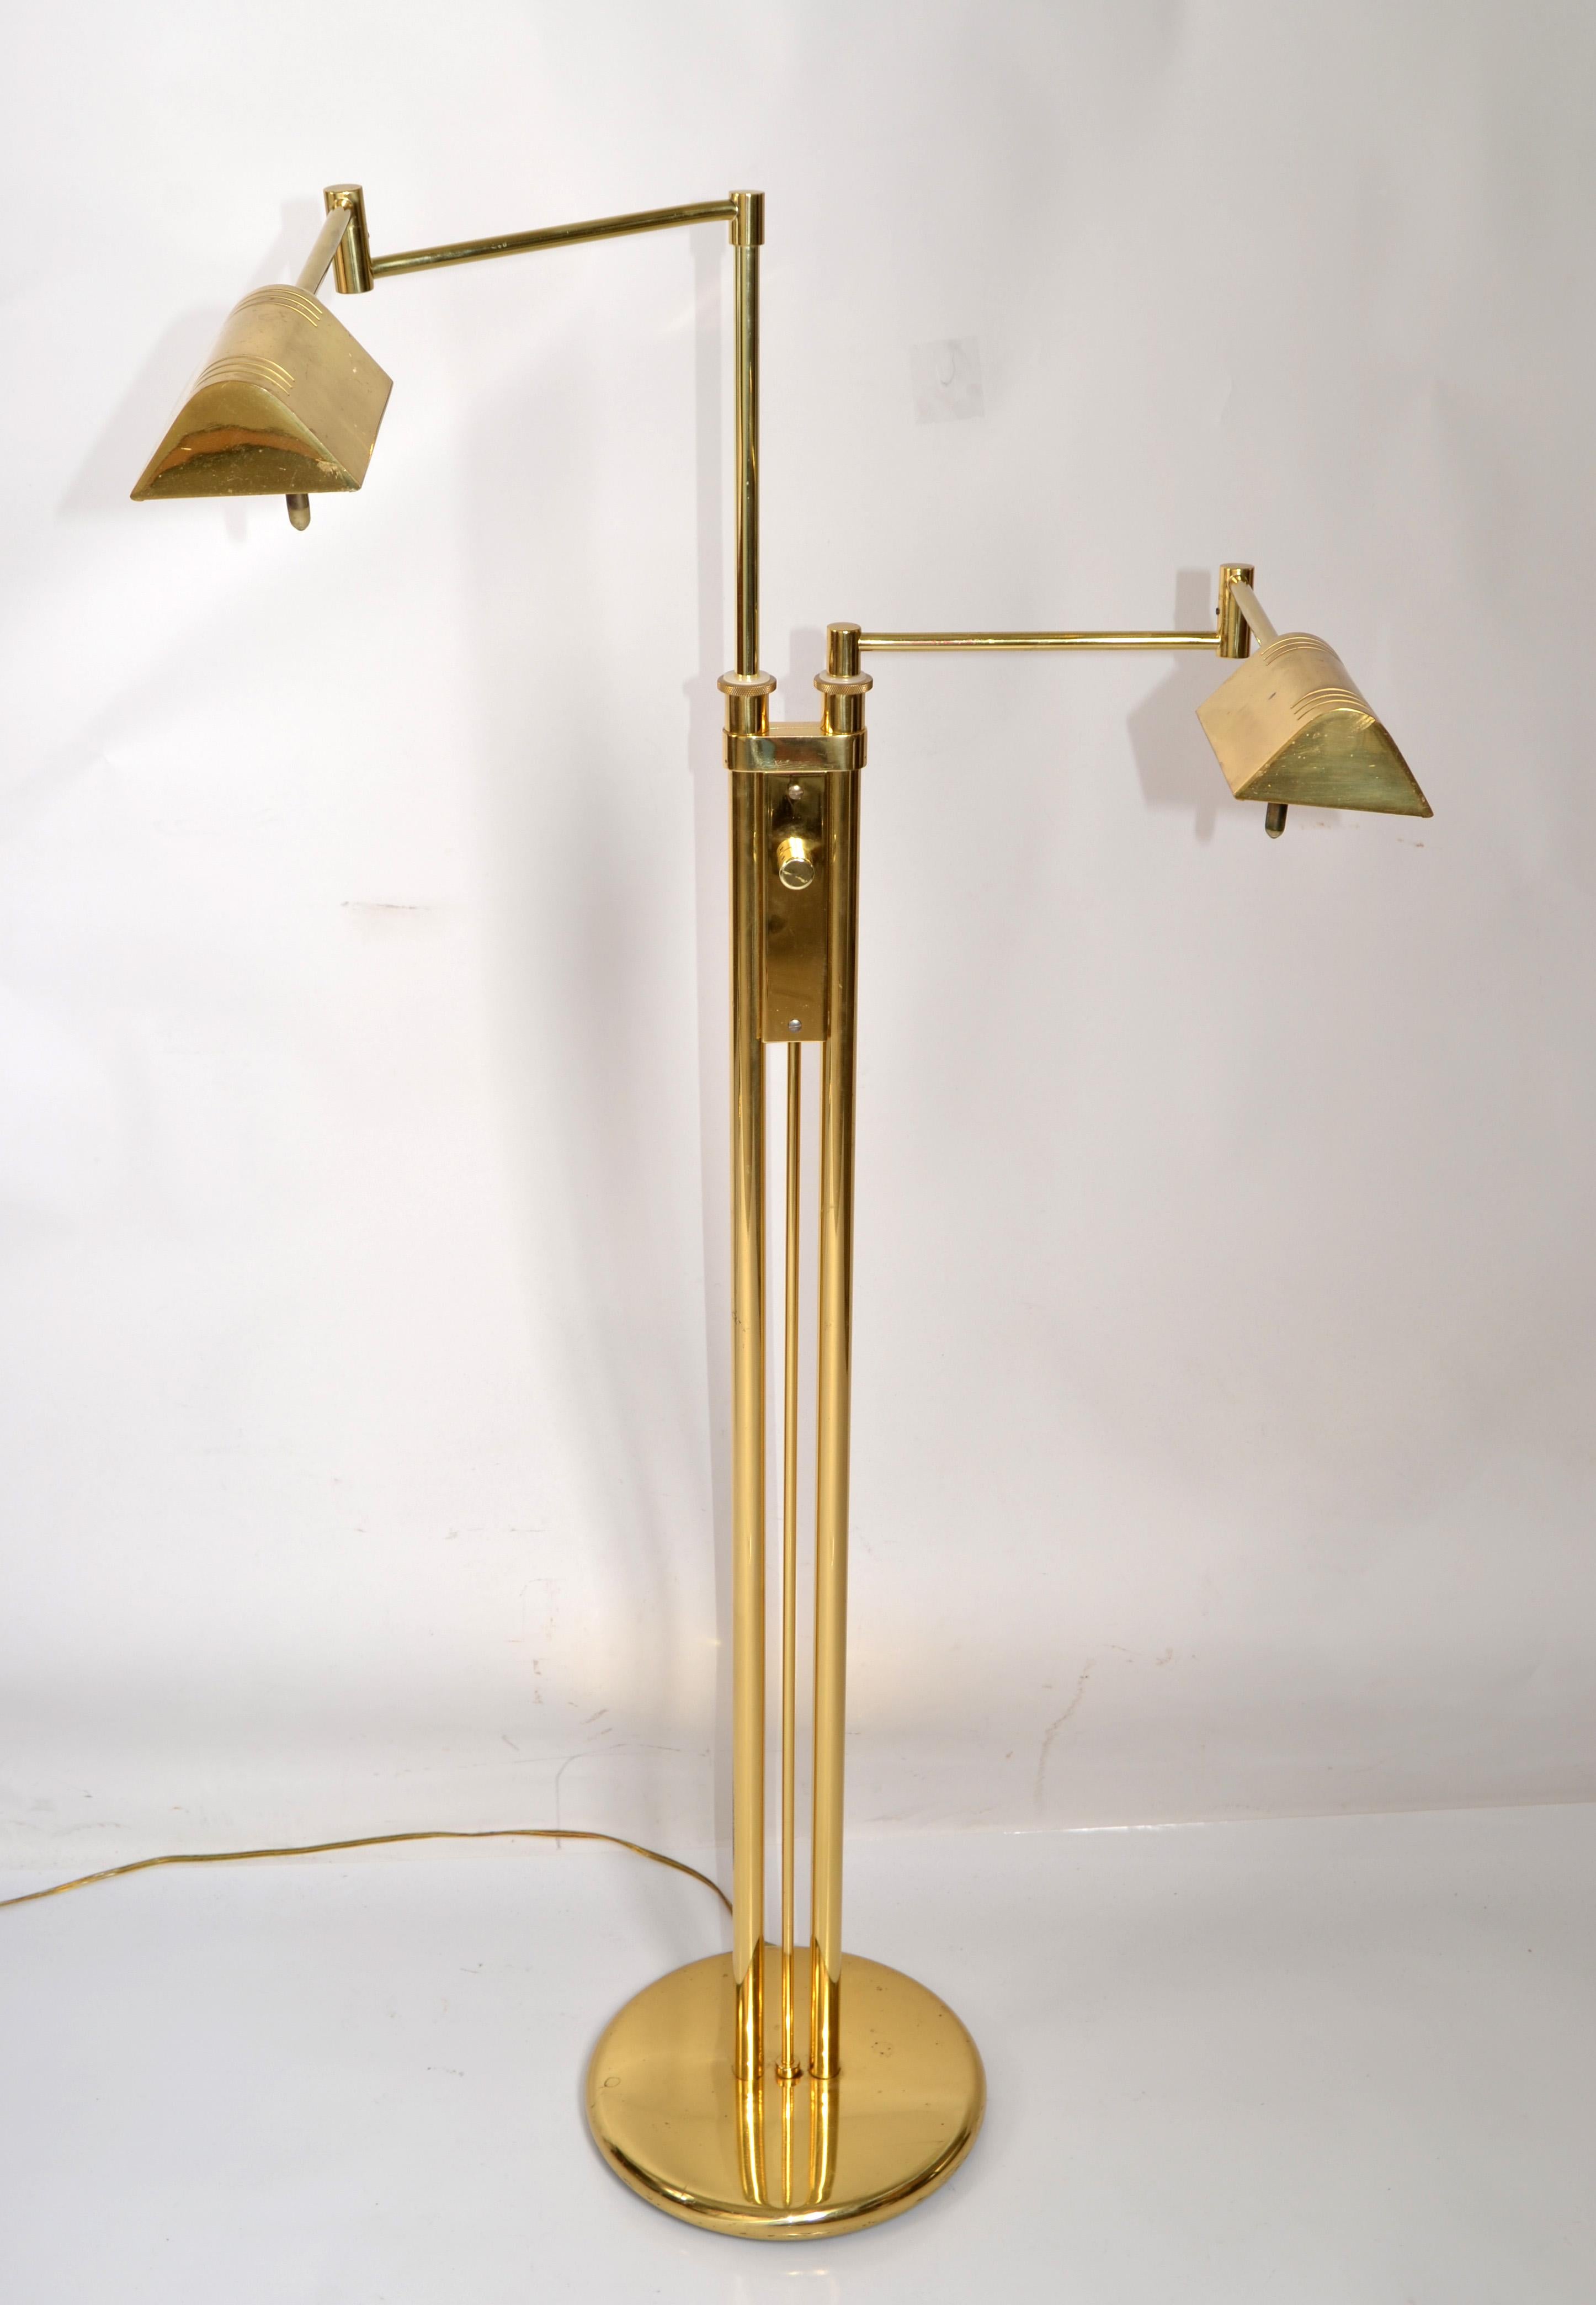 Two Arm polished Brass Holtkoetter Leuchten Floor Lamp (Holkoetter Leuchten of Germany) designed in the Style of the Bauhaus Period and made in circa Beginning of 1980s.  
Reading pharmacy lamp with swing arm floor lamps next to Your favorite